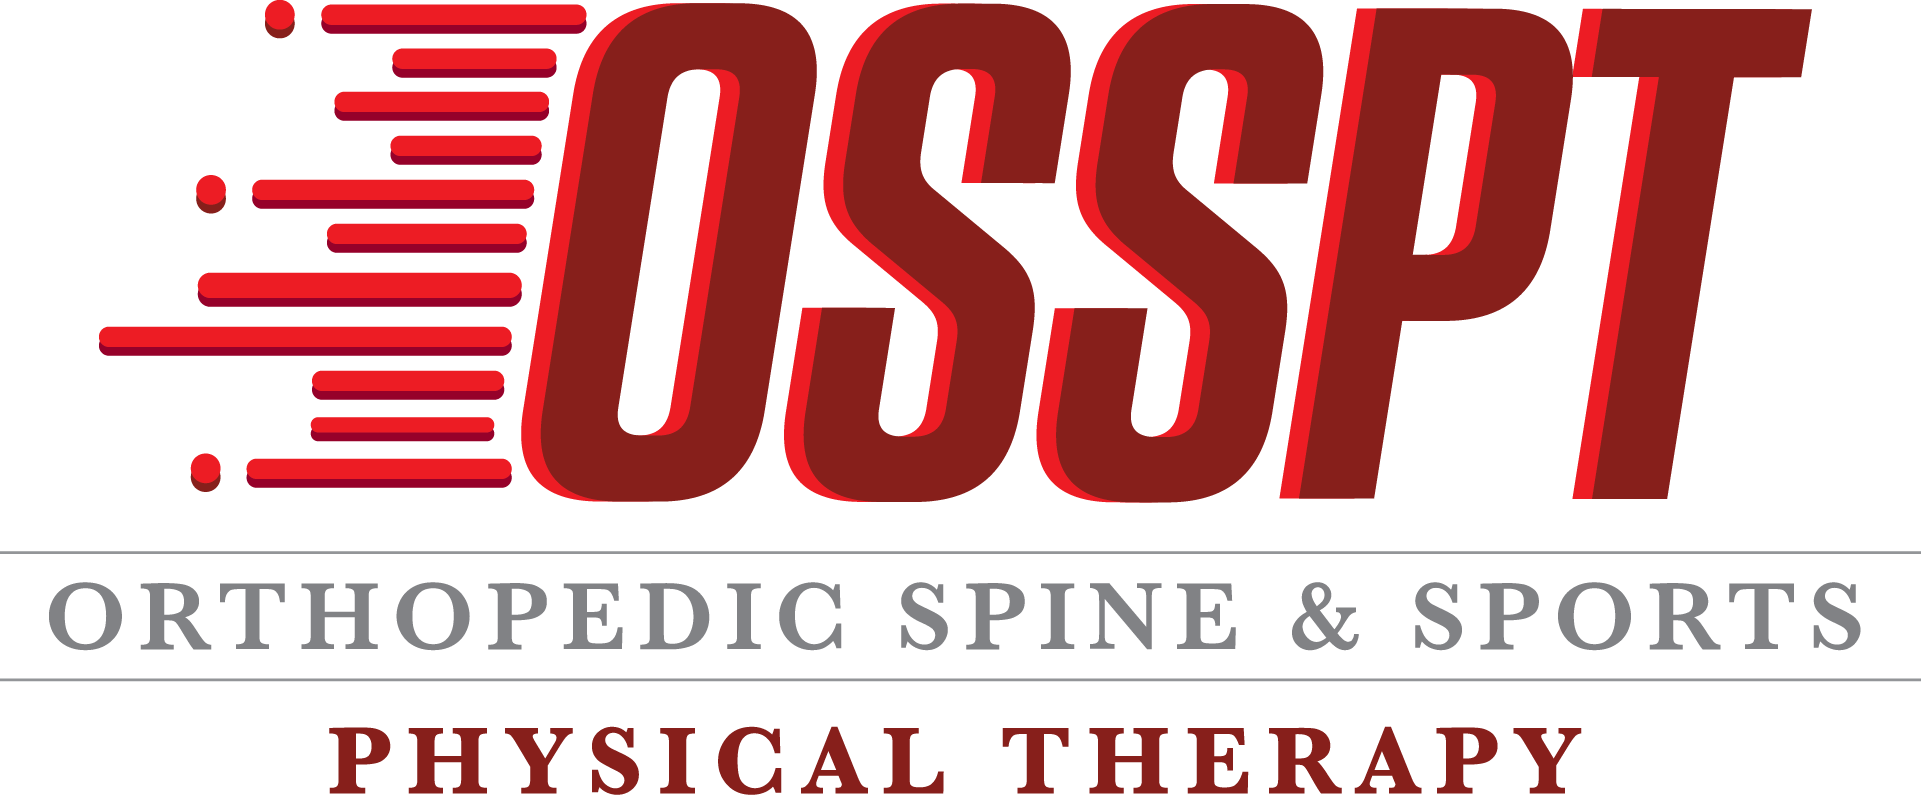 Orthopedic Spine & Sports Physical Therapy